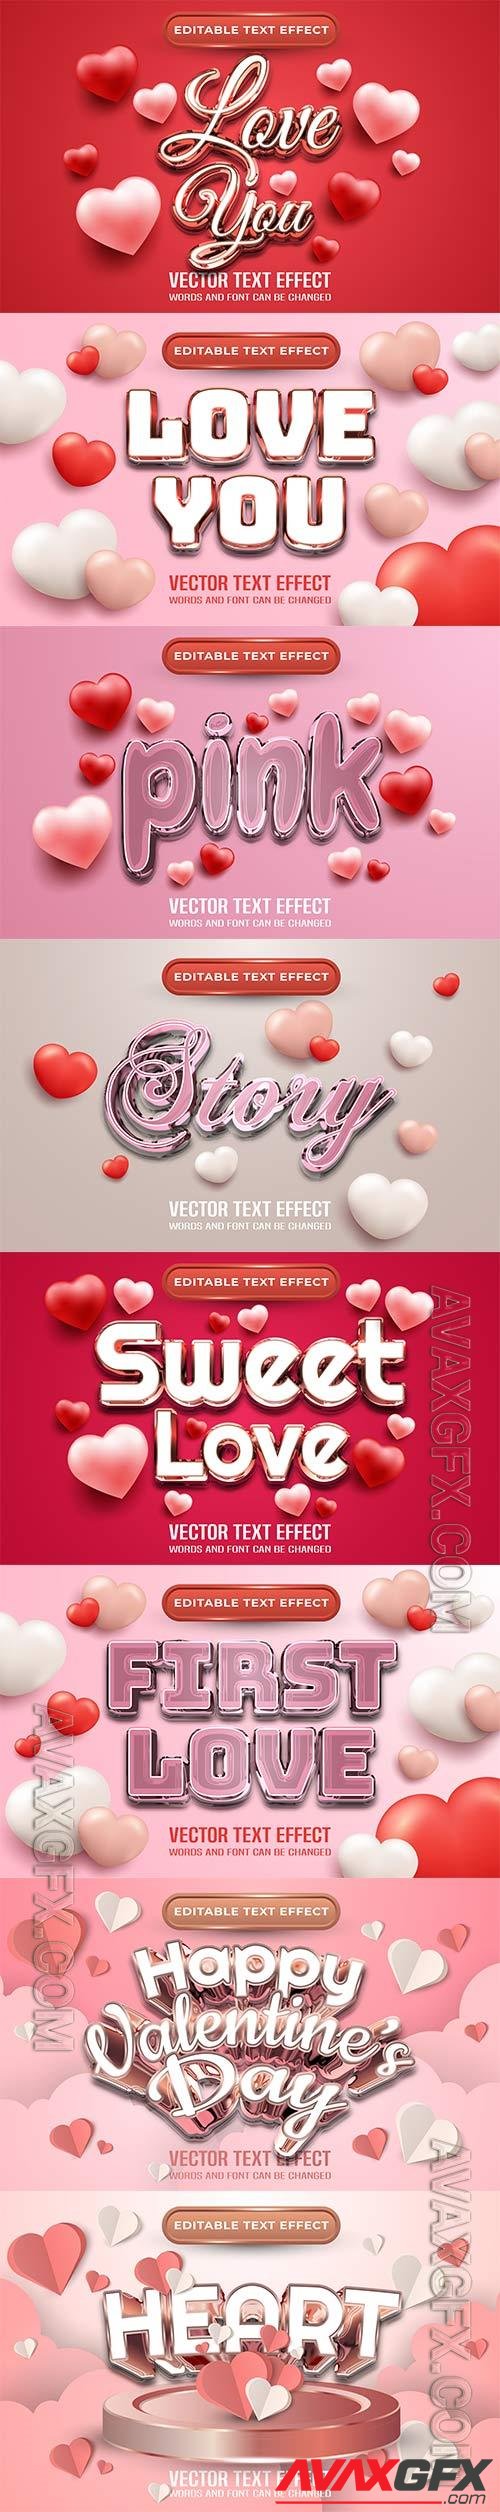 Love you editable text effect special happy valentines day